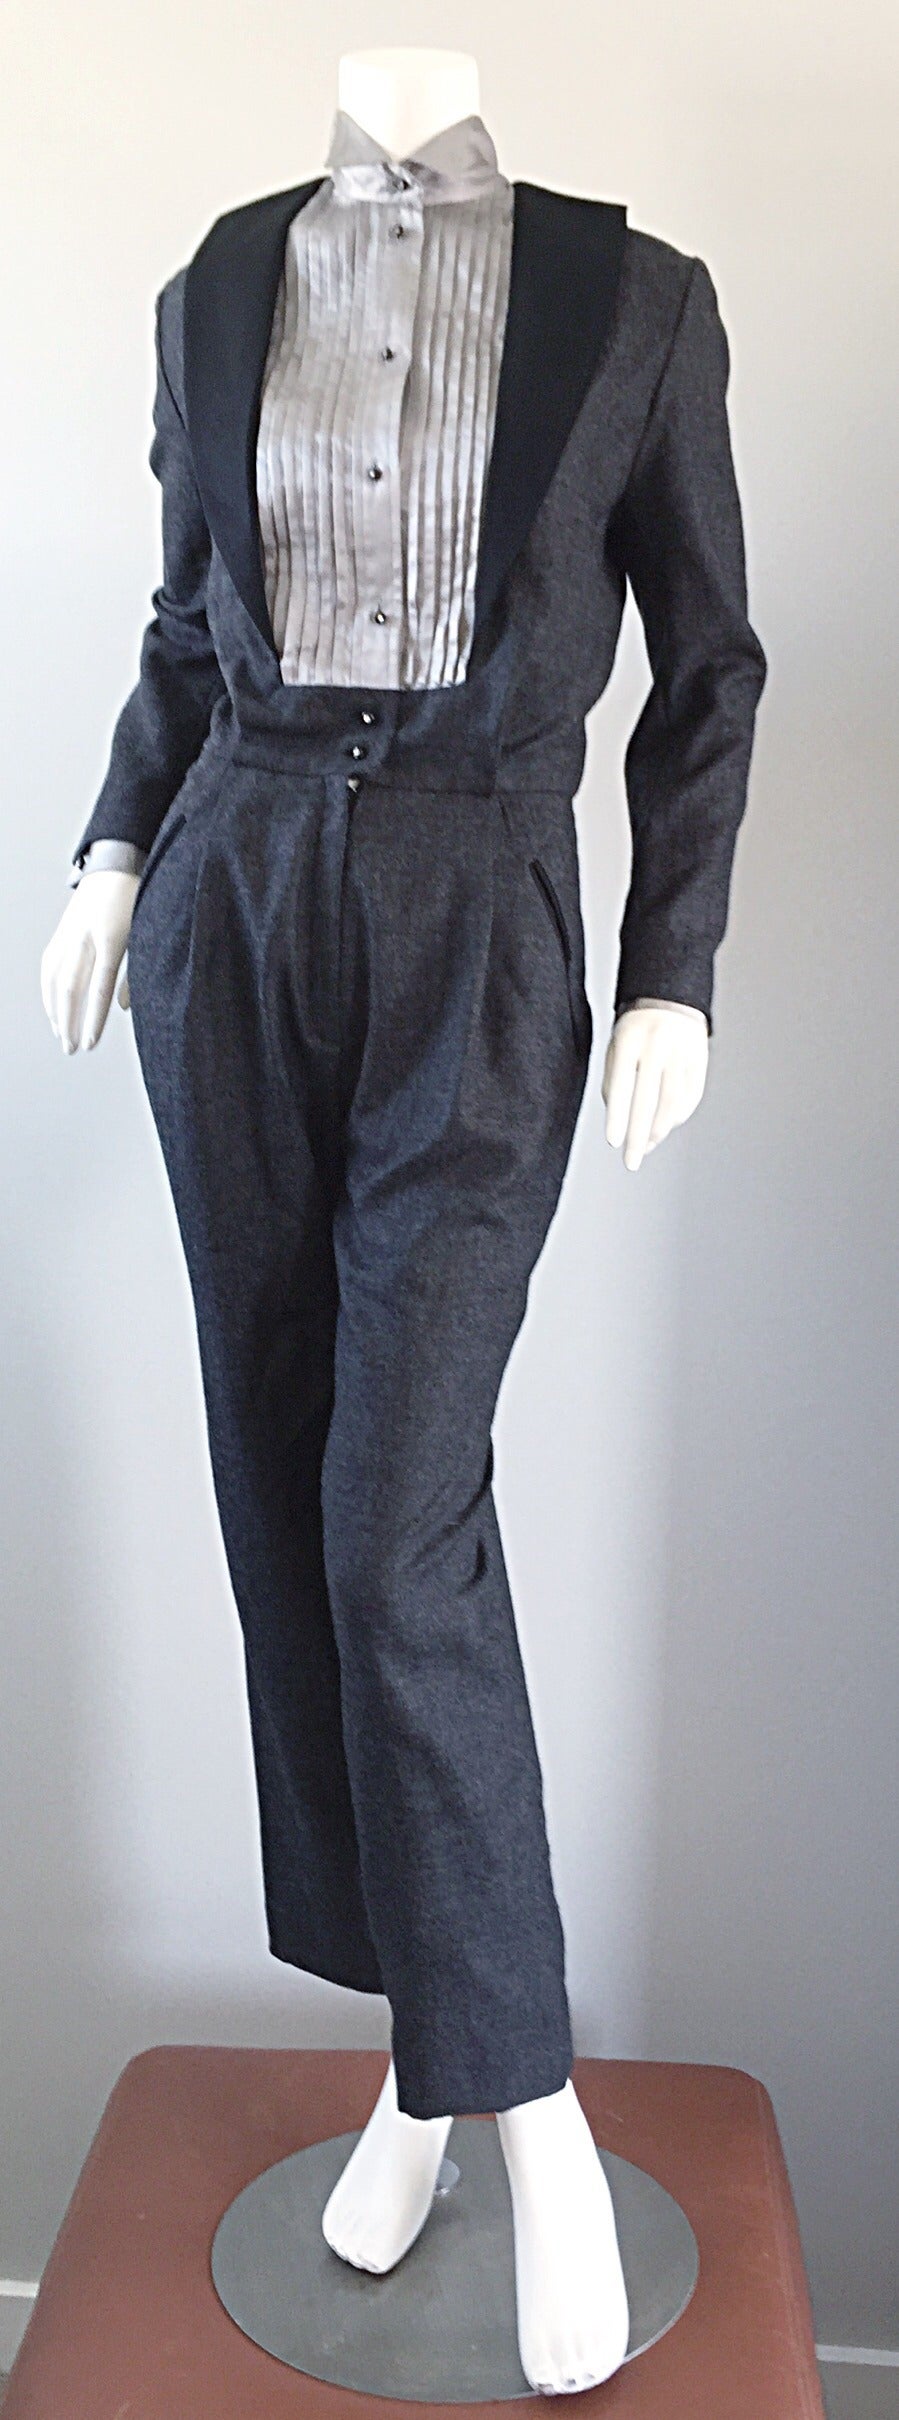 Insanely rare very early Alberta Ferretti tuxedo jumpsuit! Charcoal gray, with a silver silk blouse. Black silk shawl collar. Black buttons, with rhinestone centers down the front, and at each cuff. Lots of attention to detail. A must-have for any